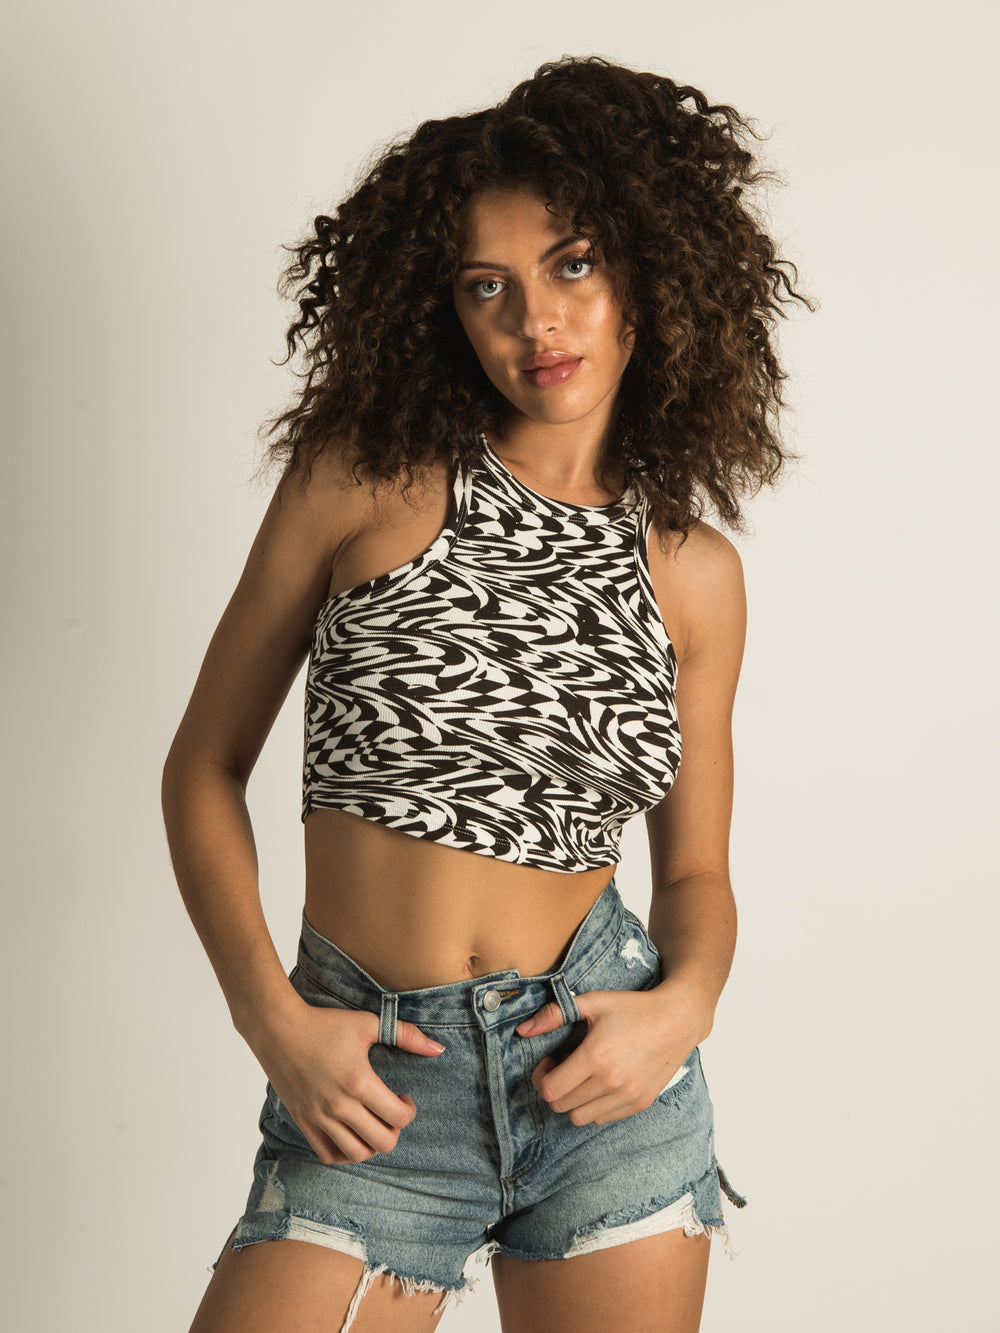 HARLOW SLIM NECK ALL OVER PRINT TANK TOP  - CLEARANCE